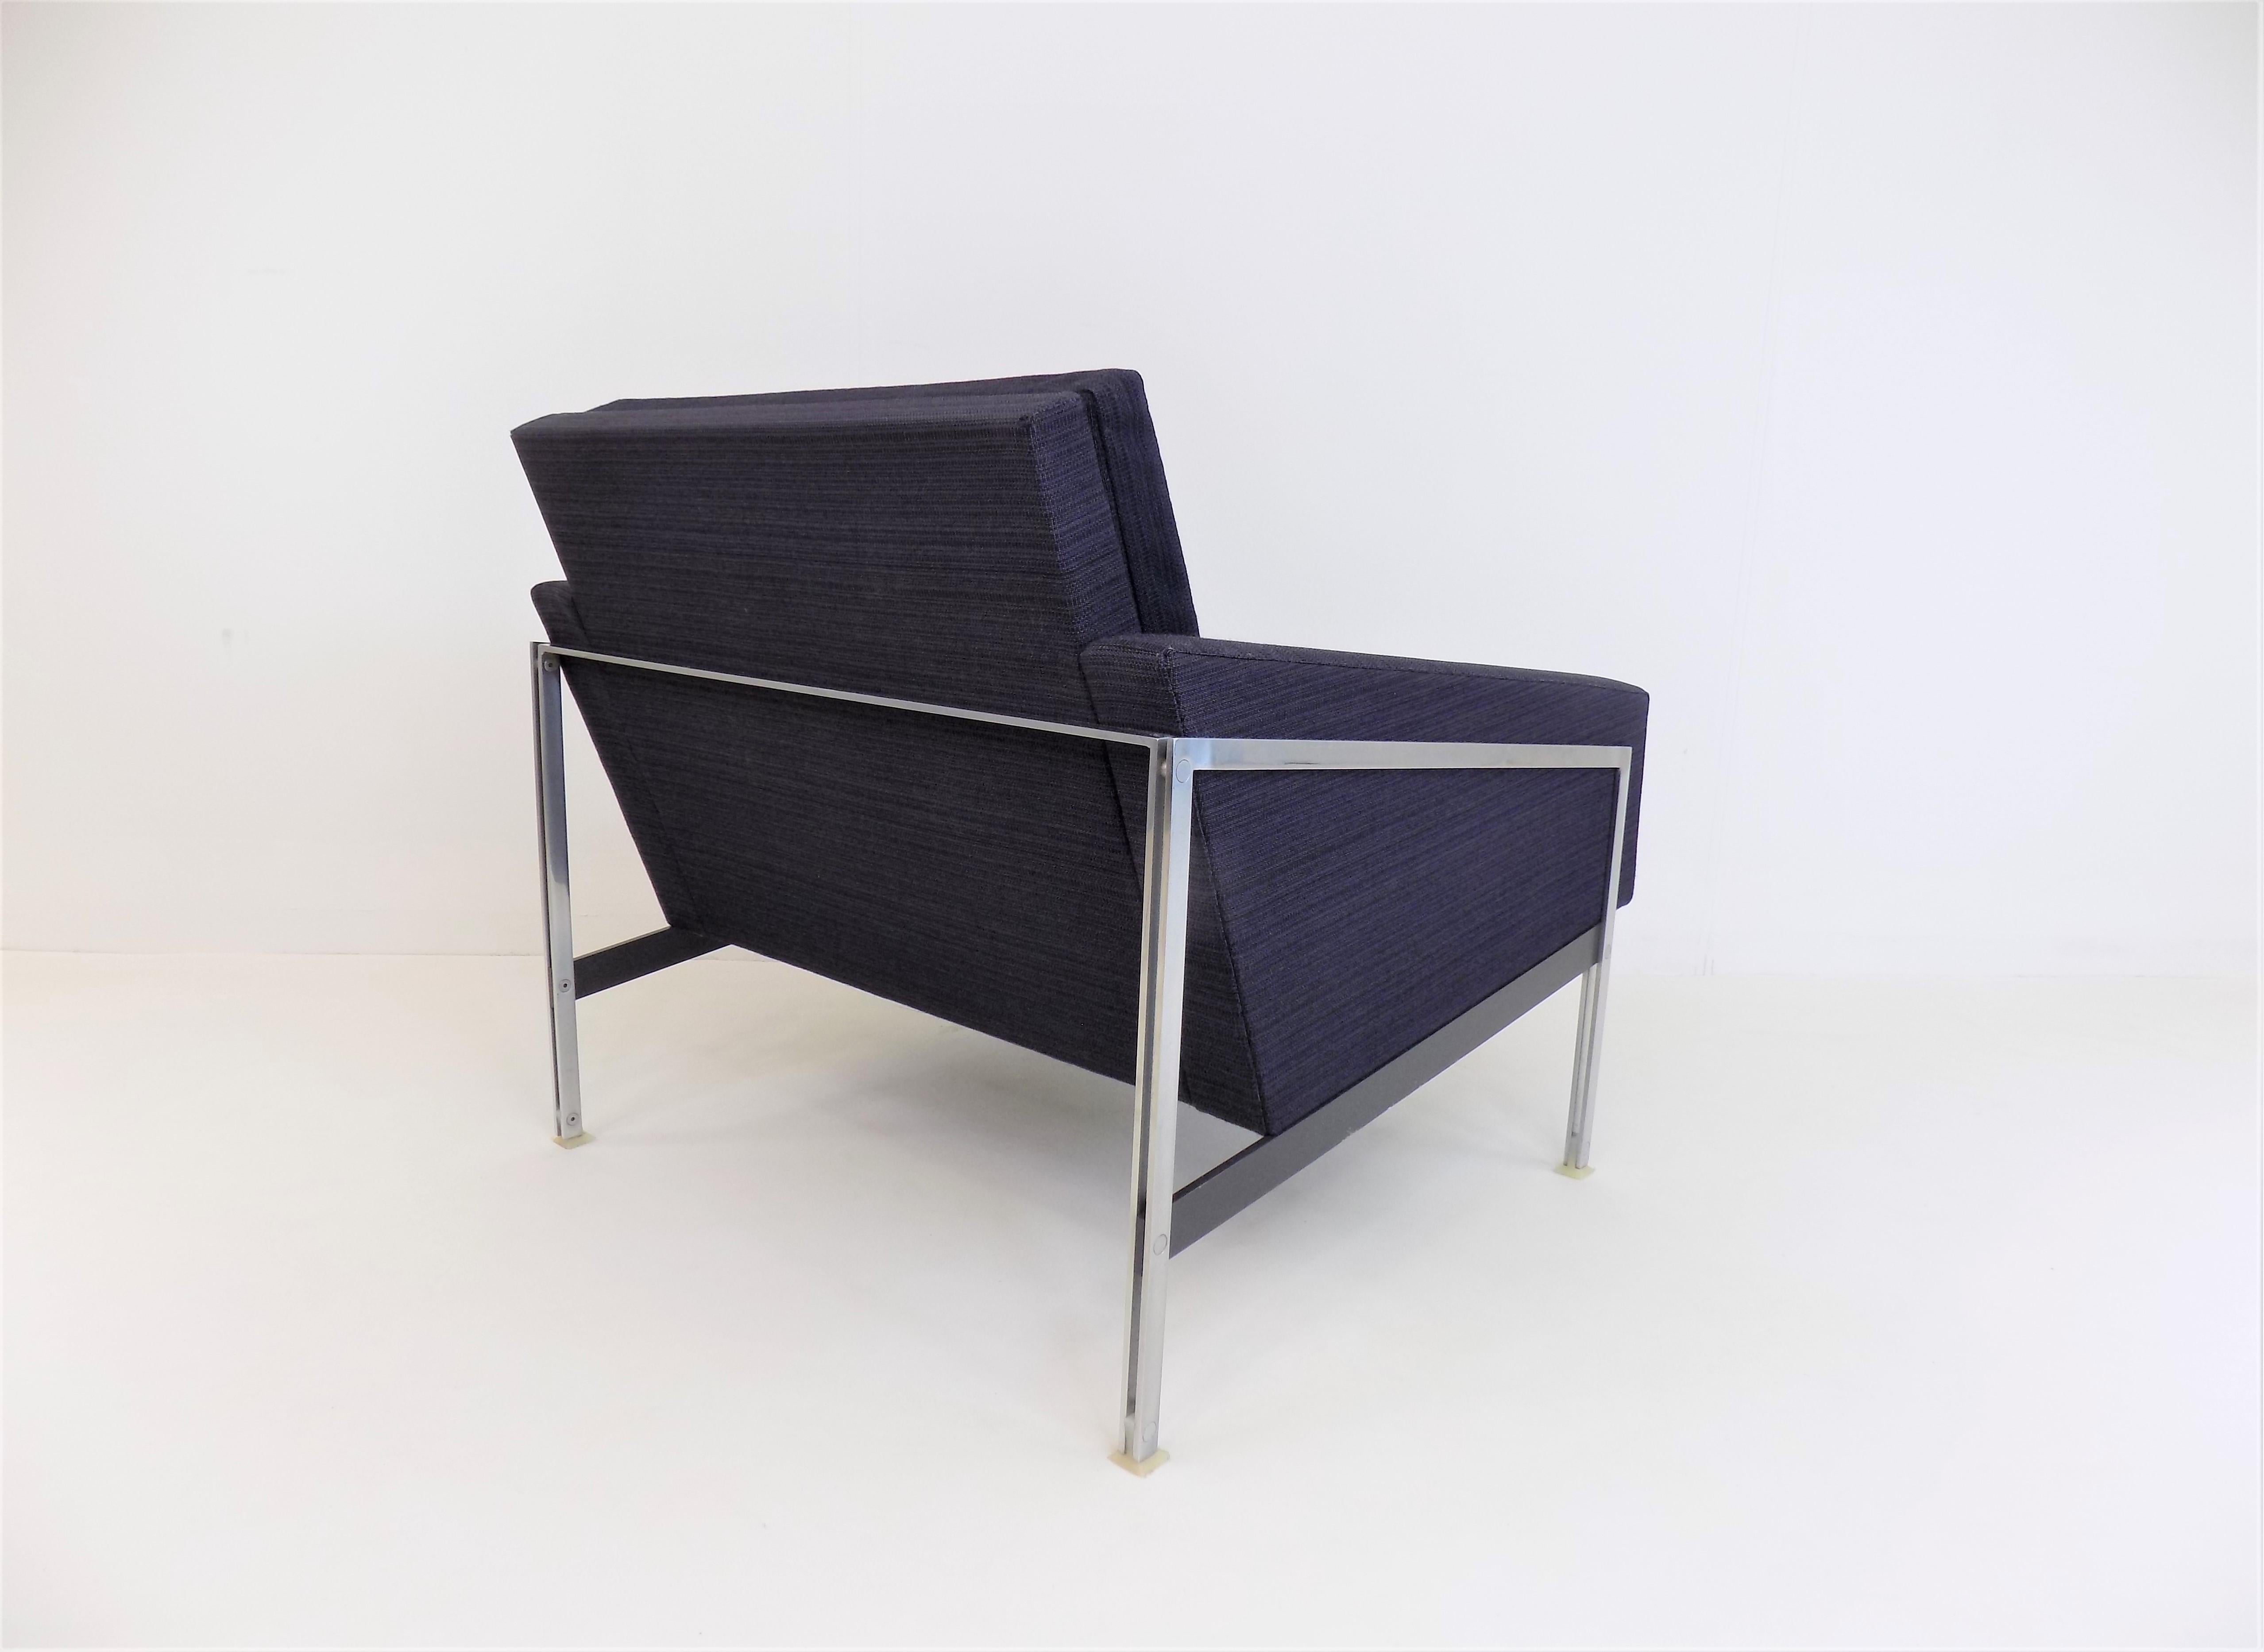 This very high quality lounge chair is in first class condition. The stainless steel frame, reminiscent of designs by Preben Fabricius & Jørgen Kastholm, and the high-quality fabric cover in midnight blue and dark purple show hardly any signs of